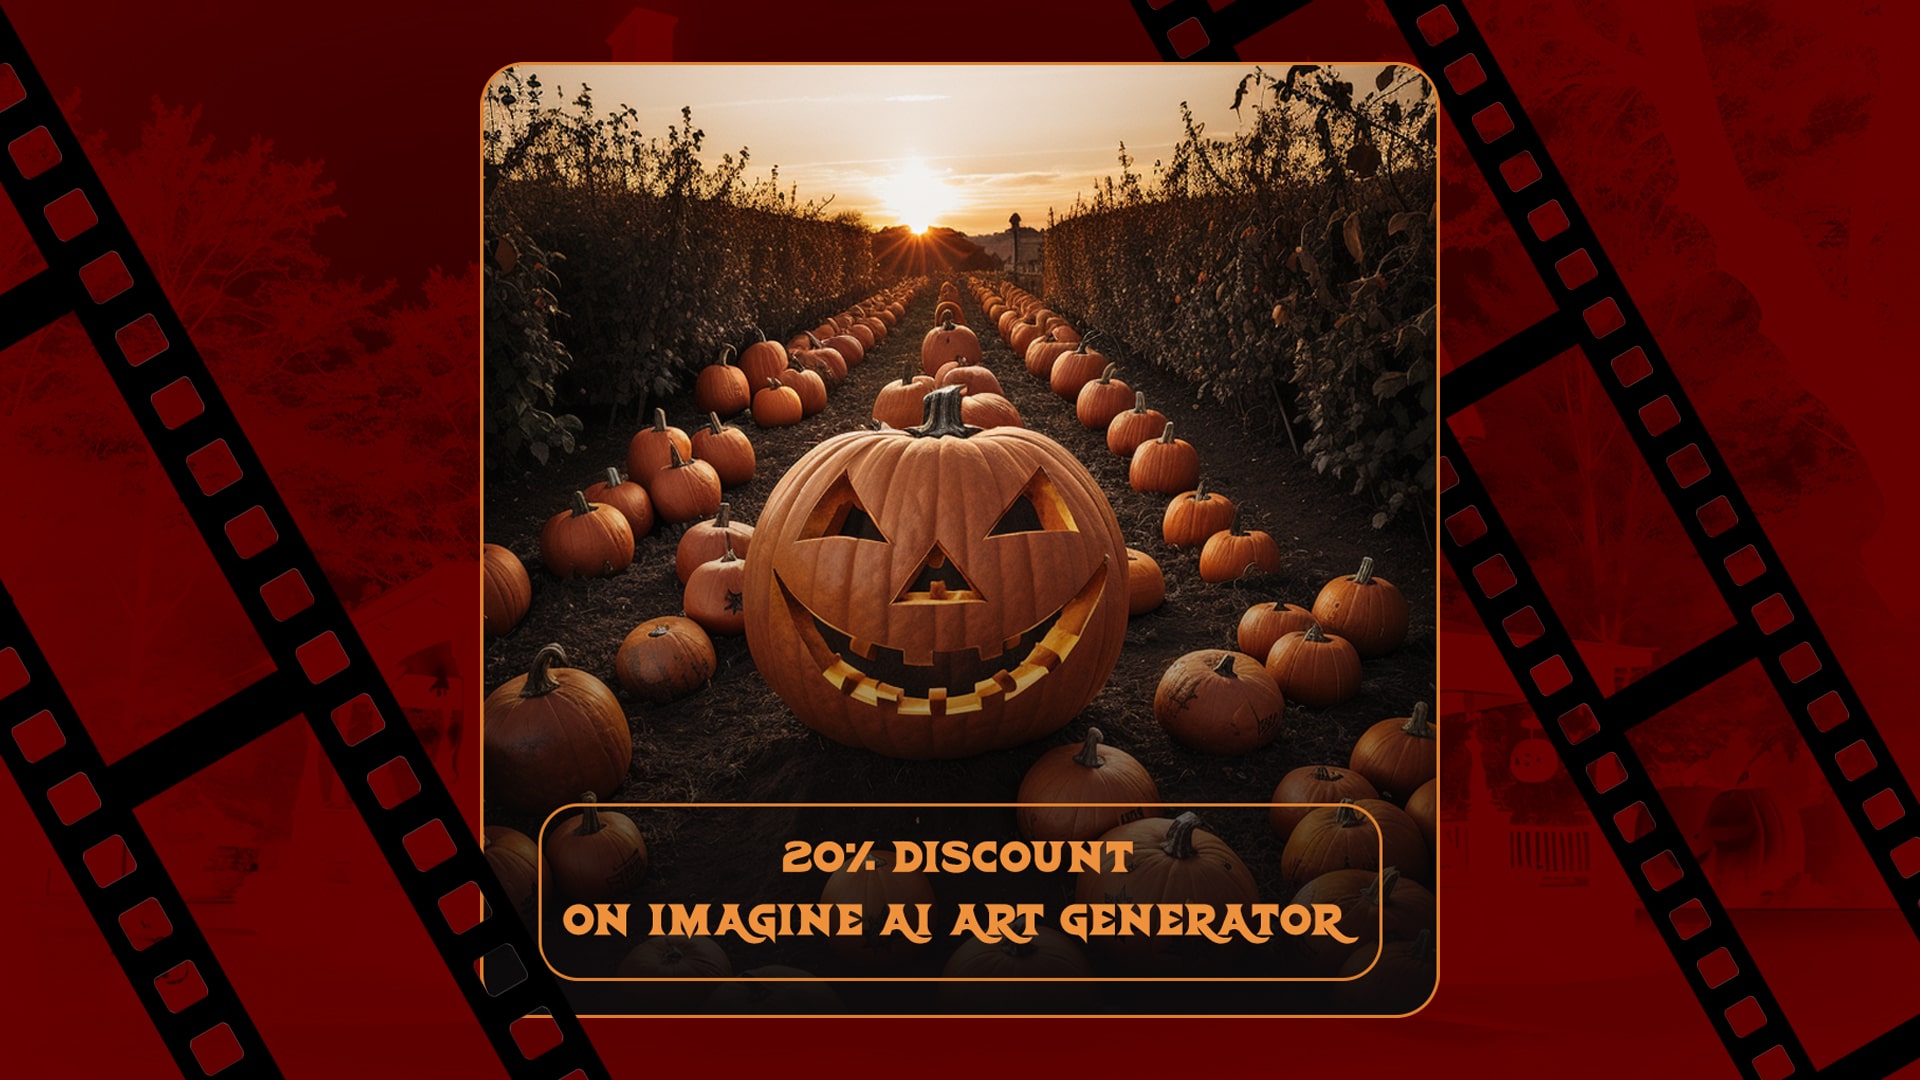 A promotional banner highlighting the 20% discount on Imagine AI Art Generator